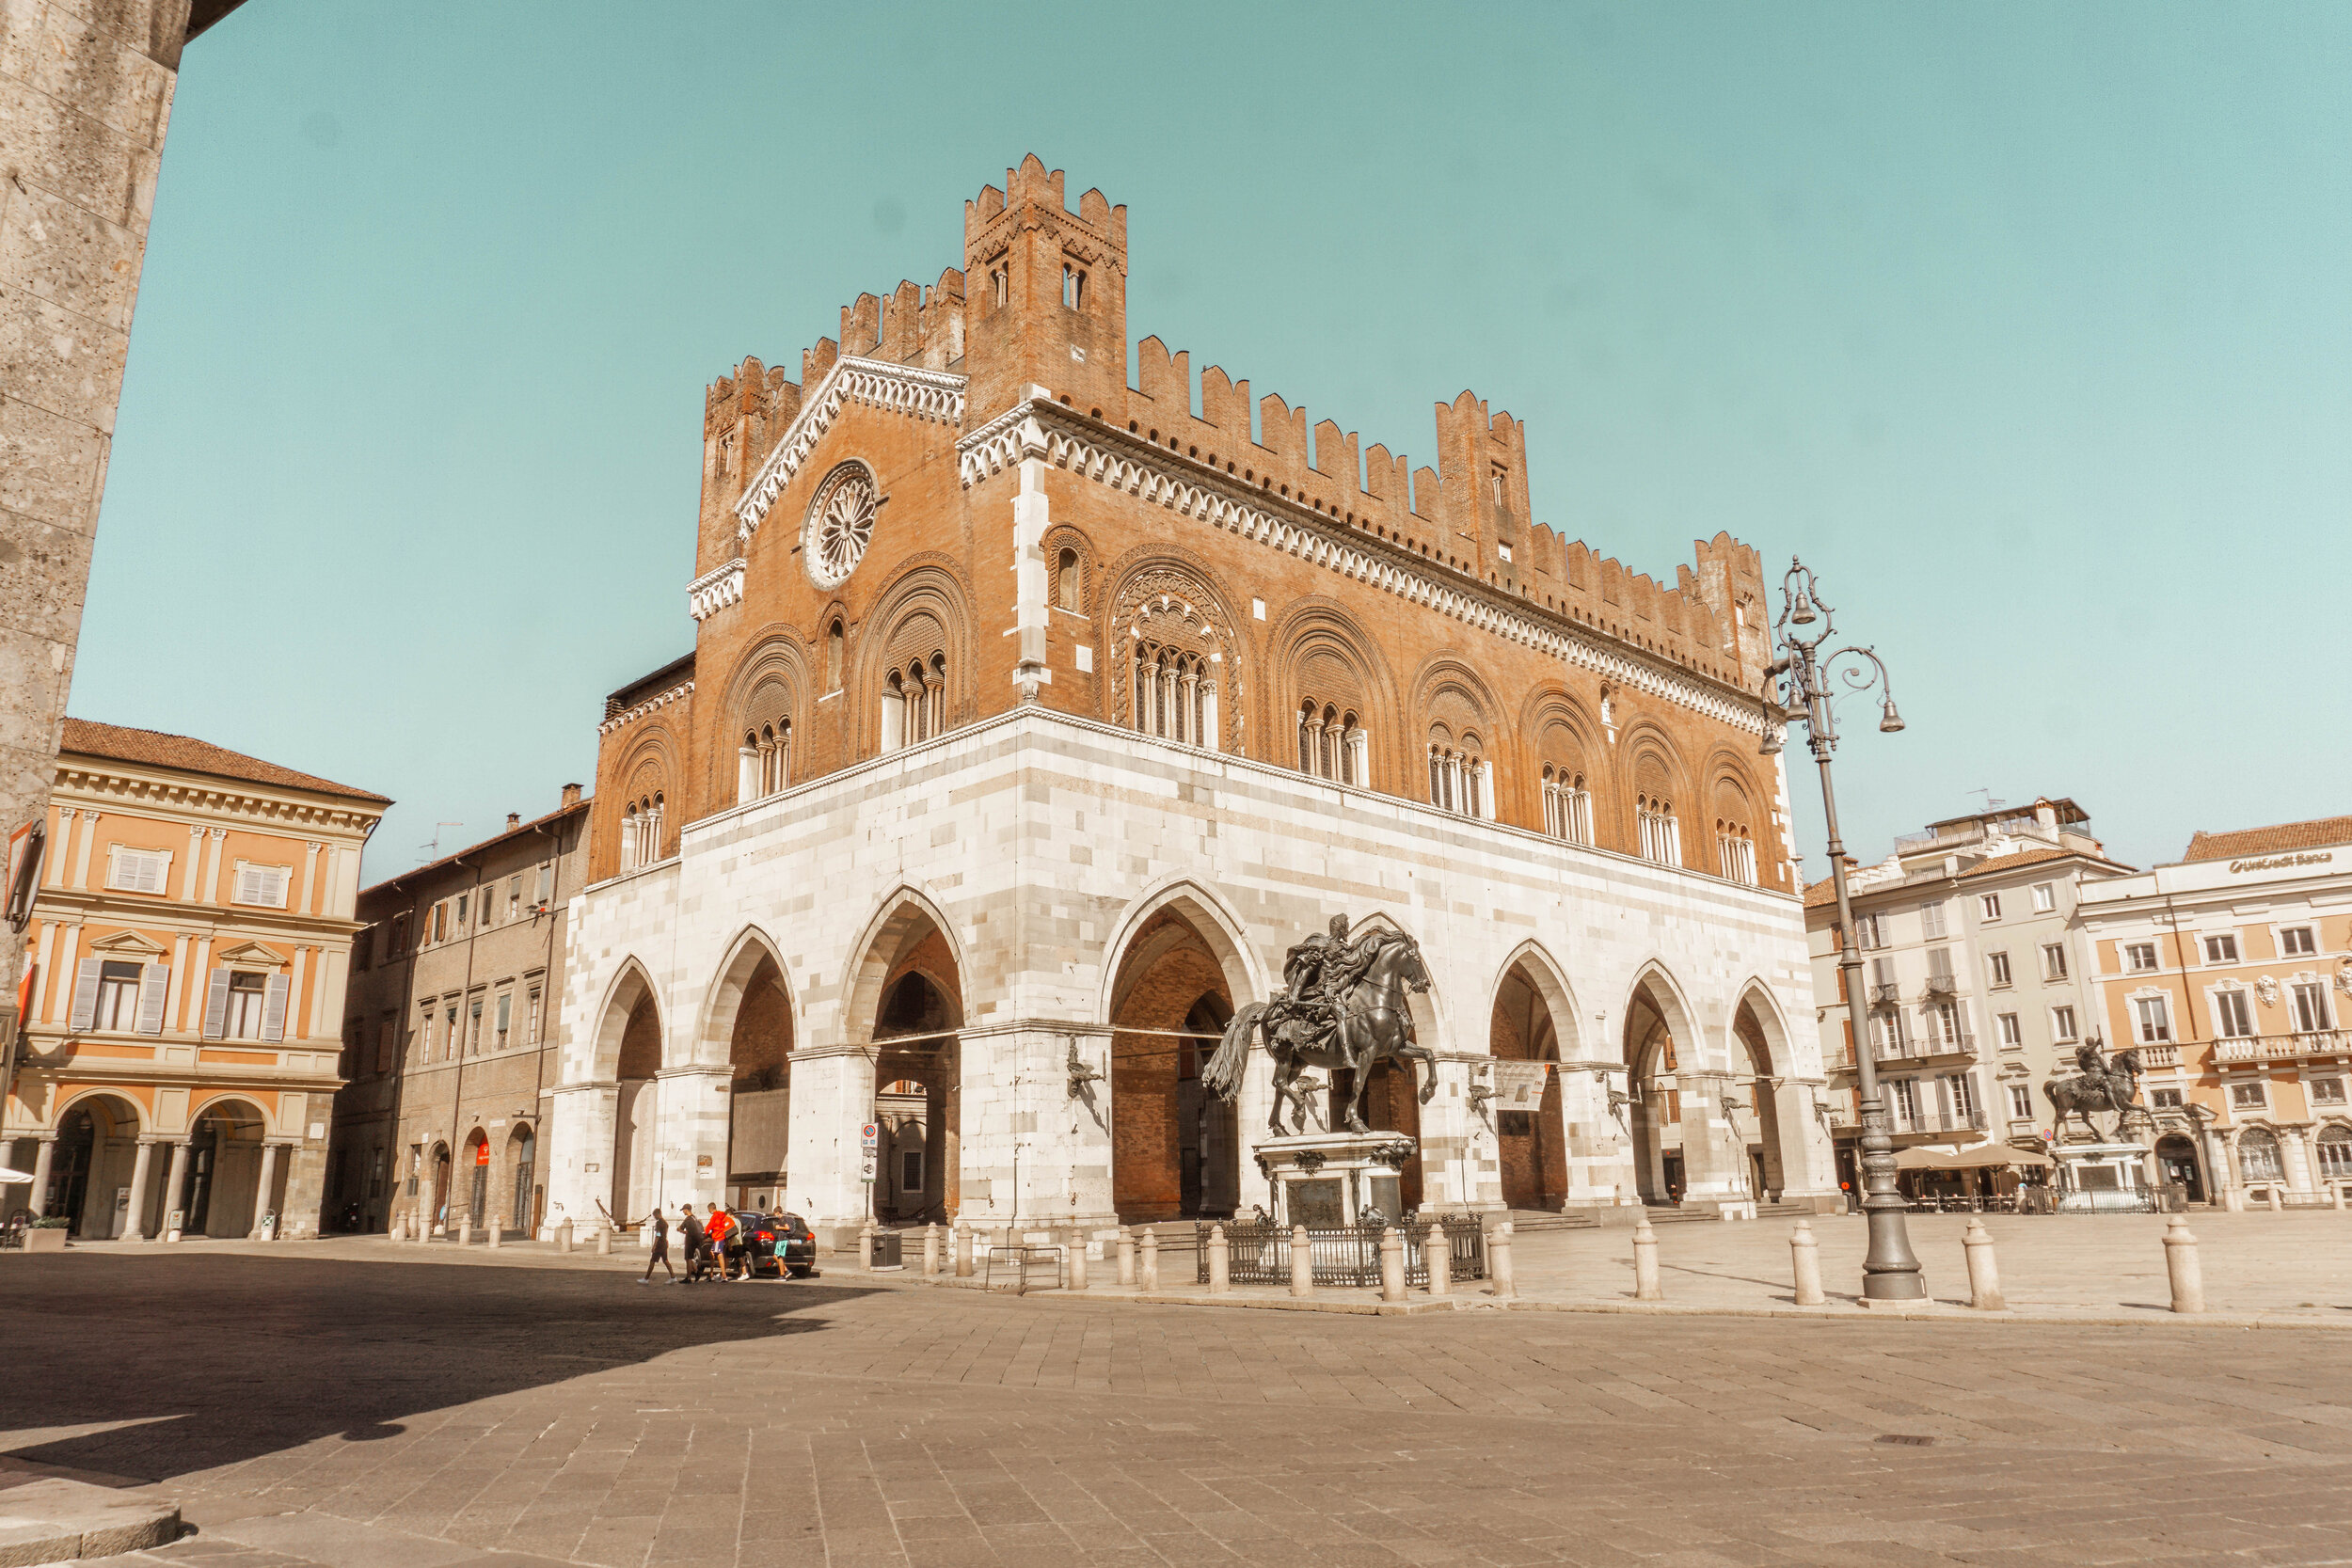 In addition to delicious food, Piacenza offers beautiful historic sights like this main square.